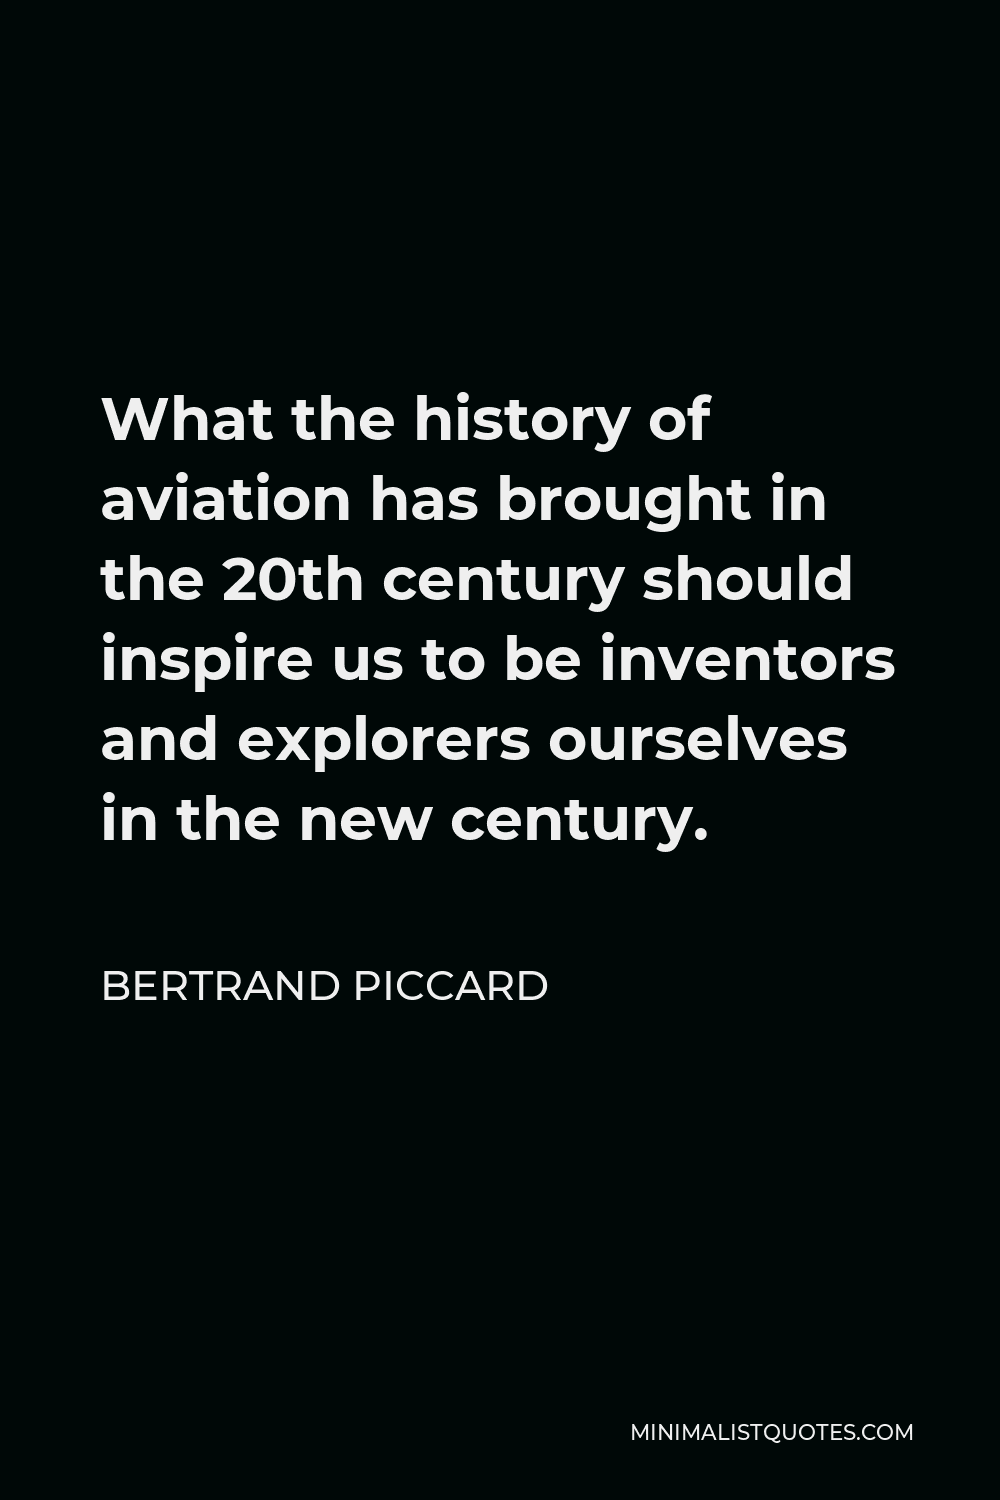 Bertrand Piccard Quote - What the history of aviation has brought in the 20th century should inspire us to be inventors and explorers ourselves in the new century.